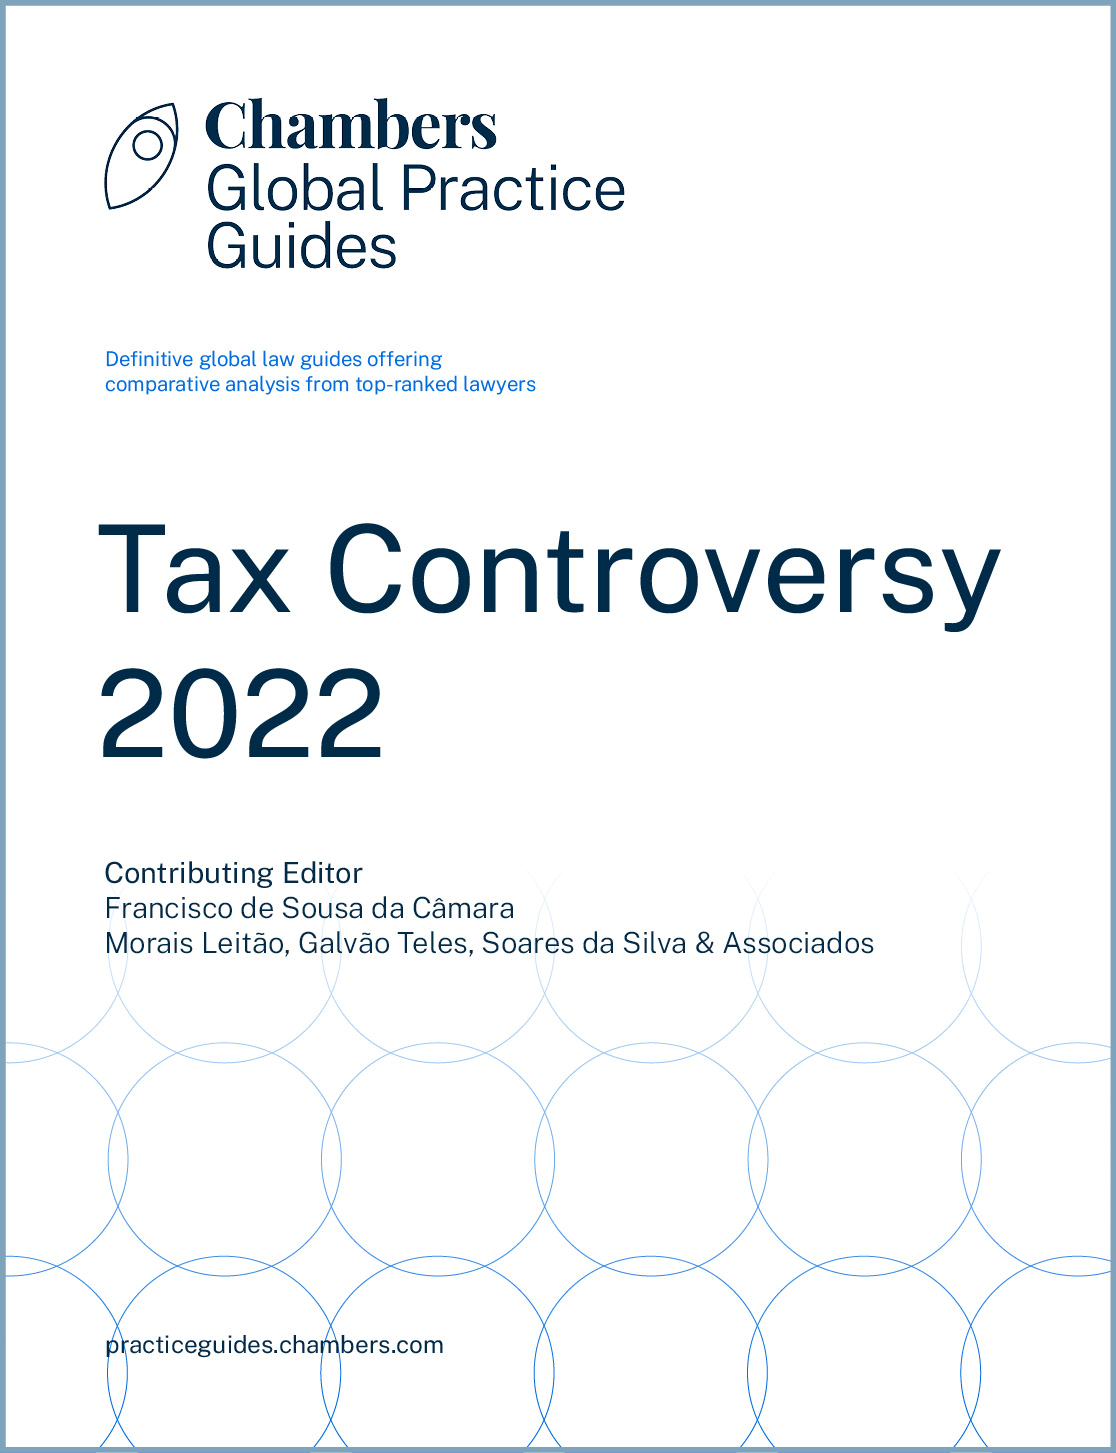 Tax Controversy 2022 Global Practice Guides Chambers and Partners